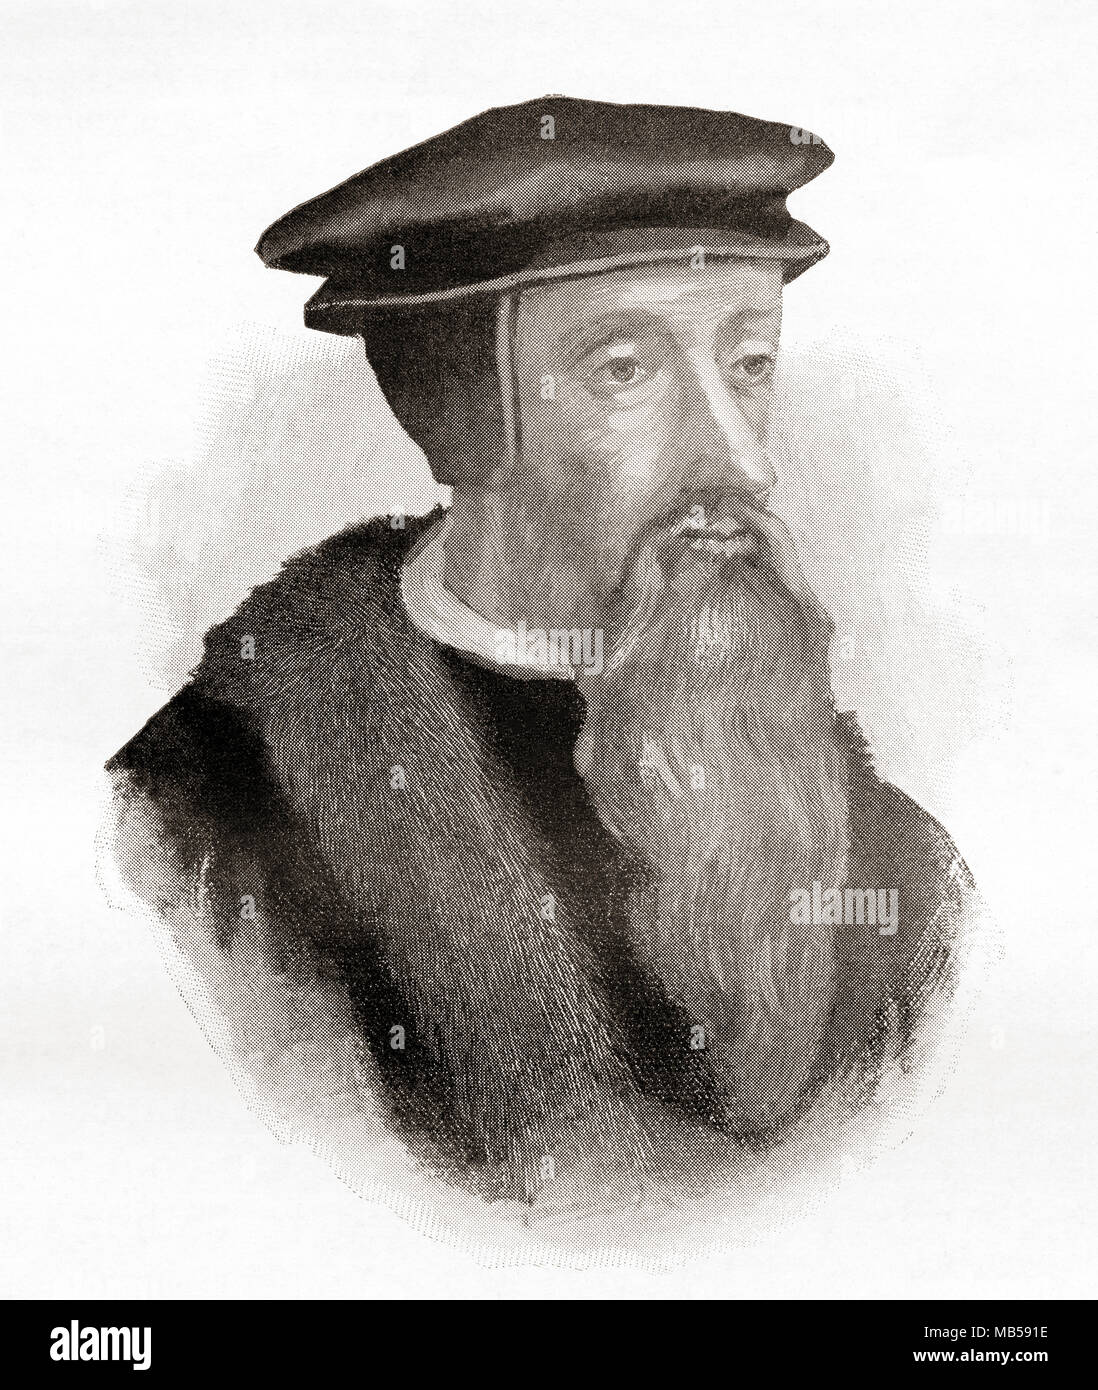 John Calvin, born Jehan Cauvin,1509 – 1564.  French theologian, pastor and reformer during the Protestant Reformation. From The International Library of Famous Literature, published c. 1900 Stock Photo